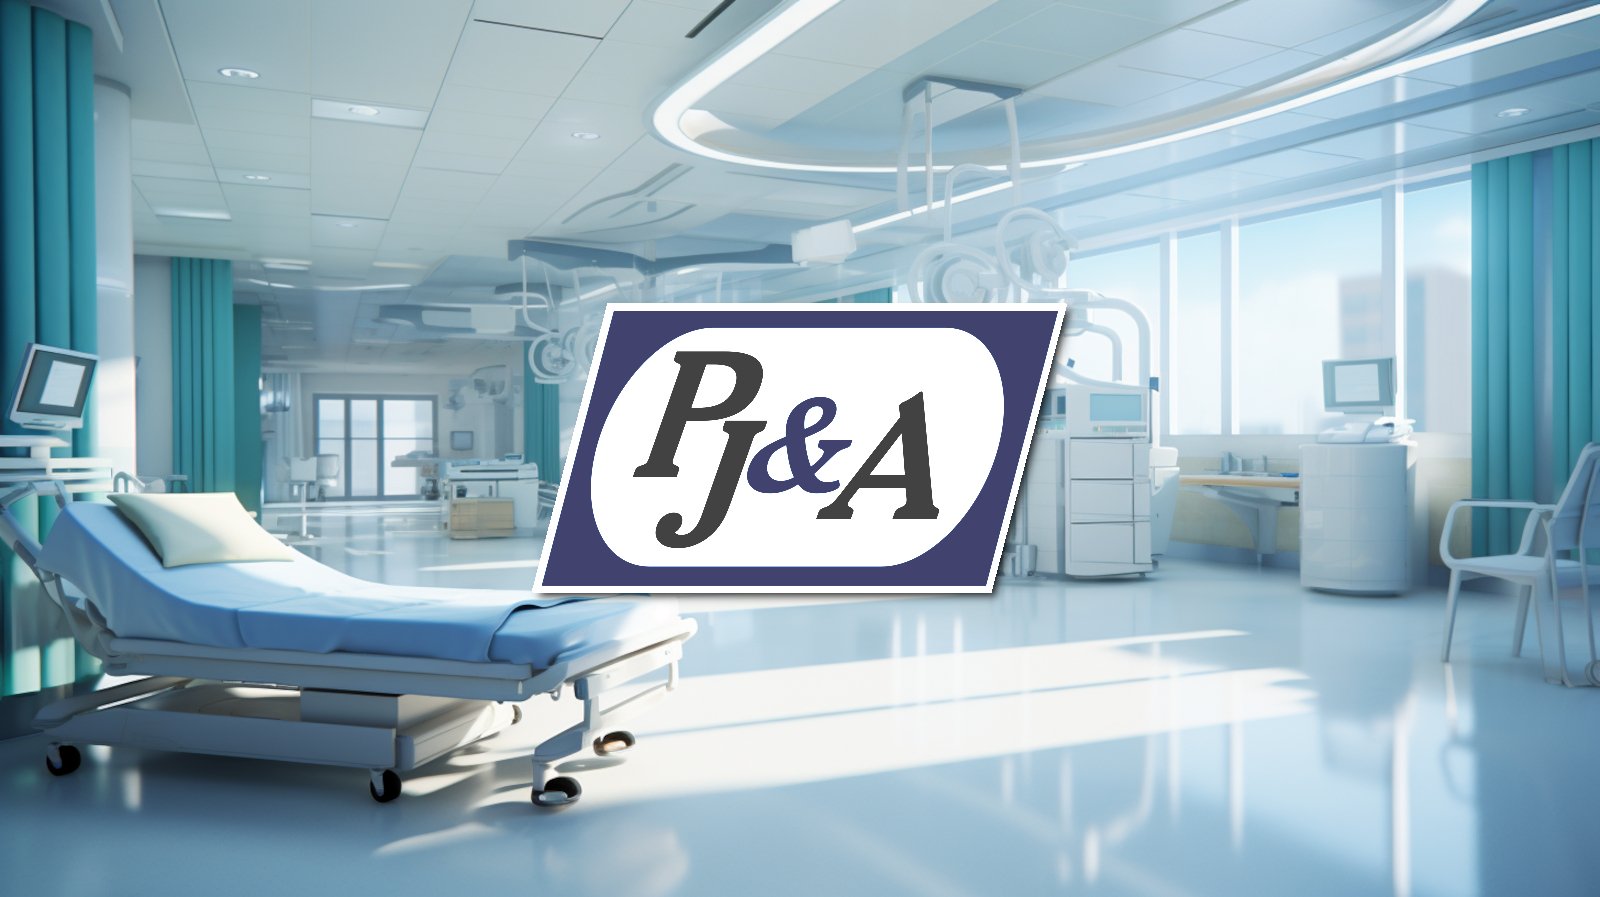 PJ&A says cyberattack exposed data of nearly 9 million patients